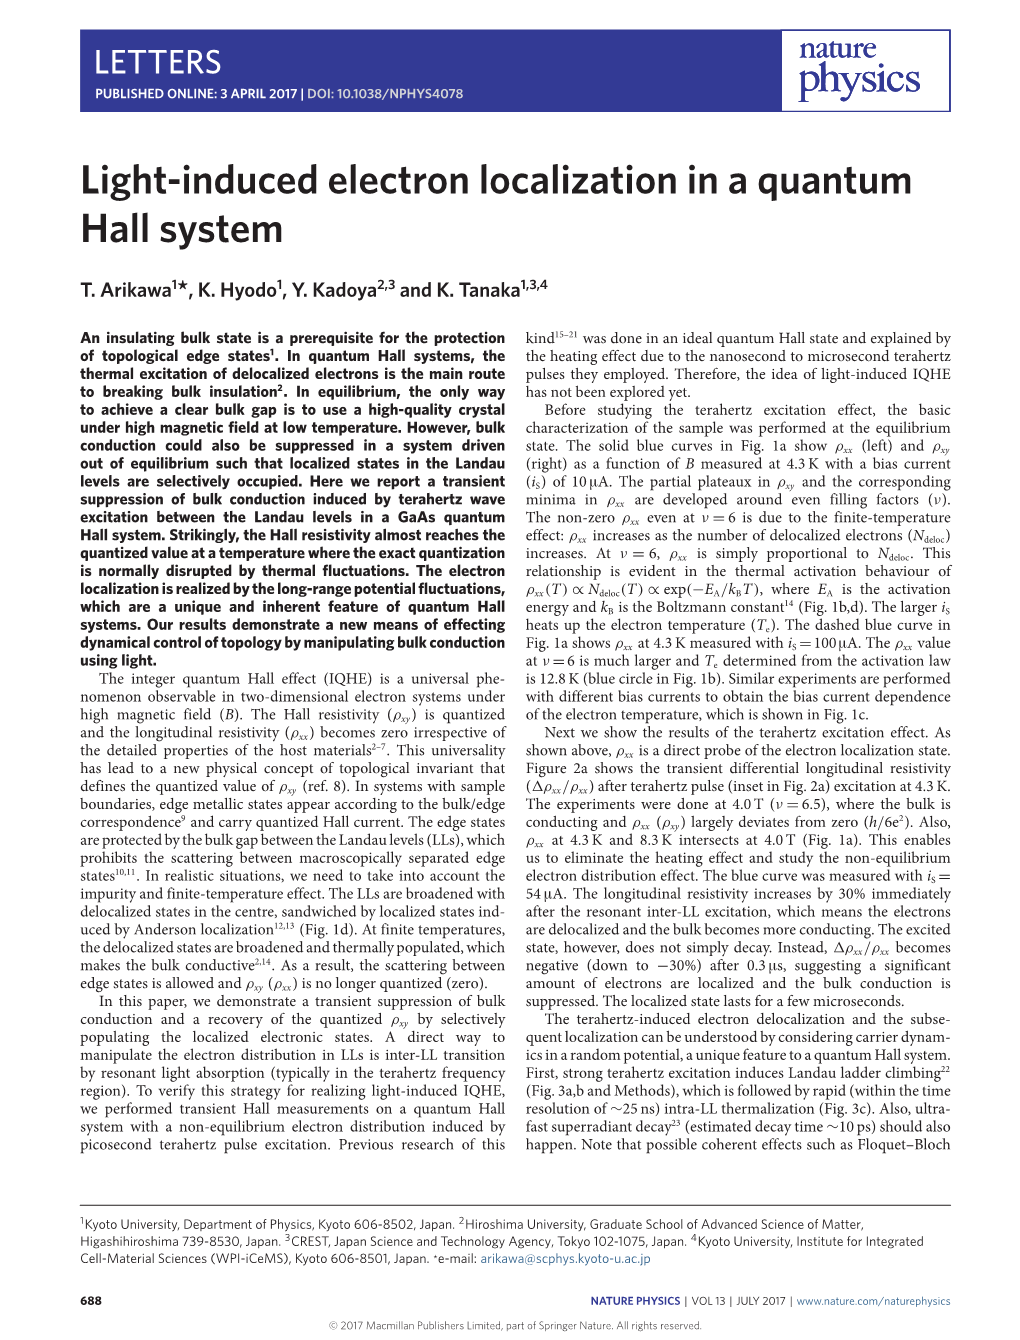 Light-Induced Electron Localization in a Quantum Hall System